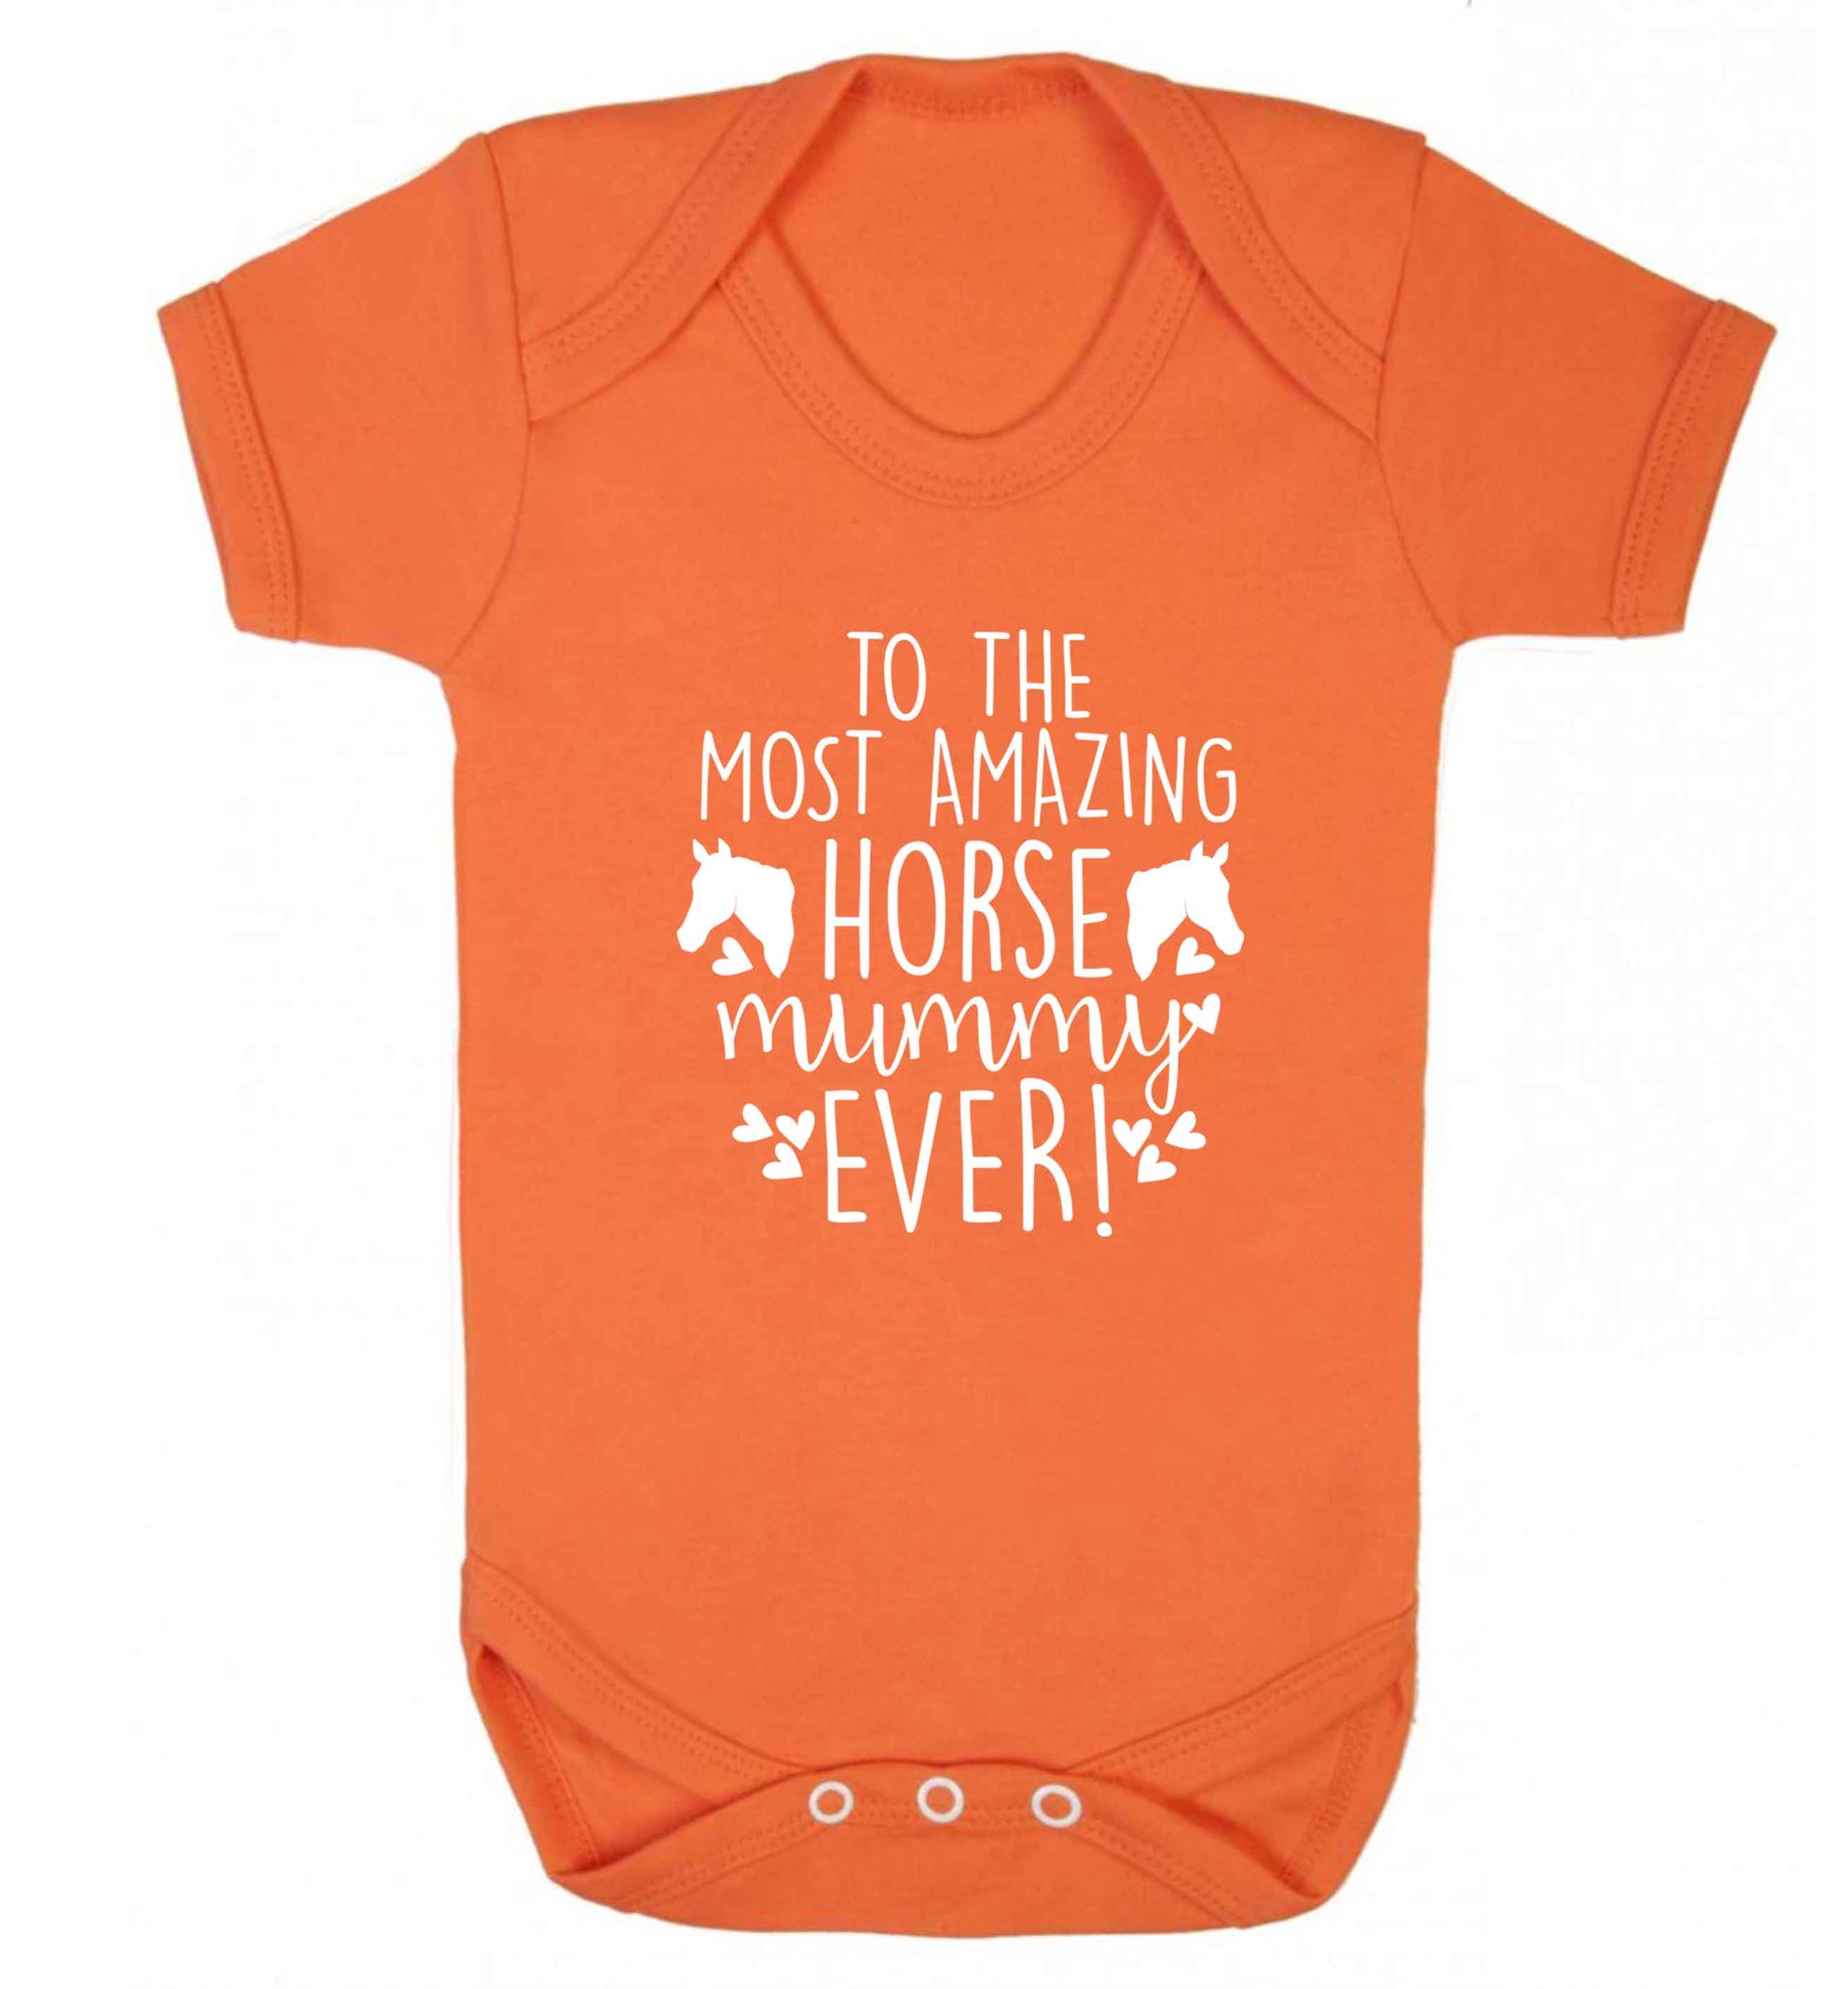 To the most amazing horse mummy ever! baby vest orange 18-24 months